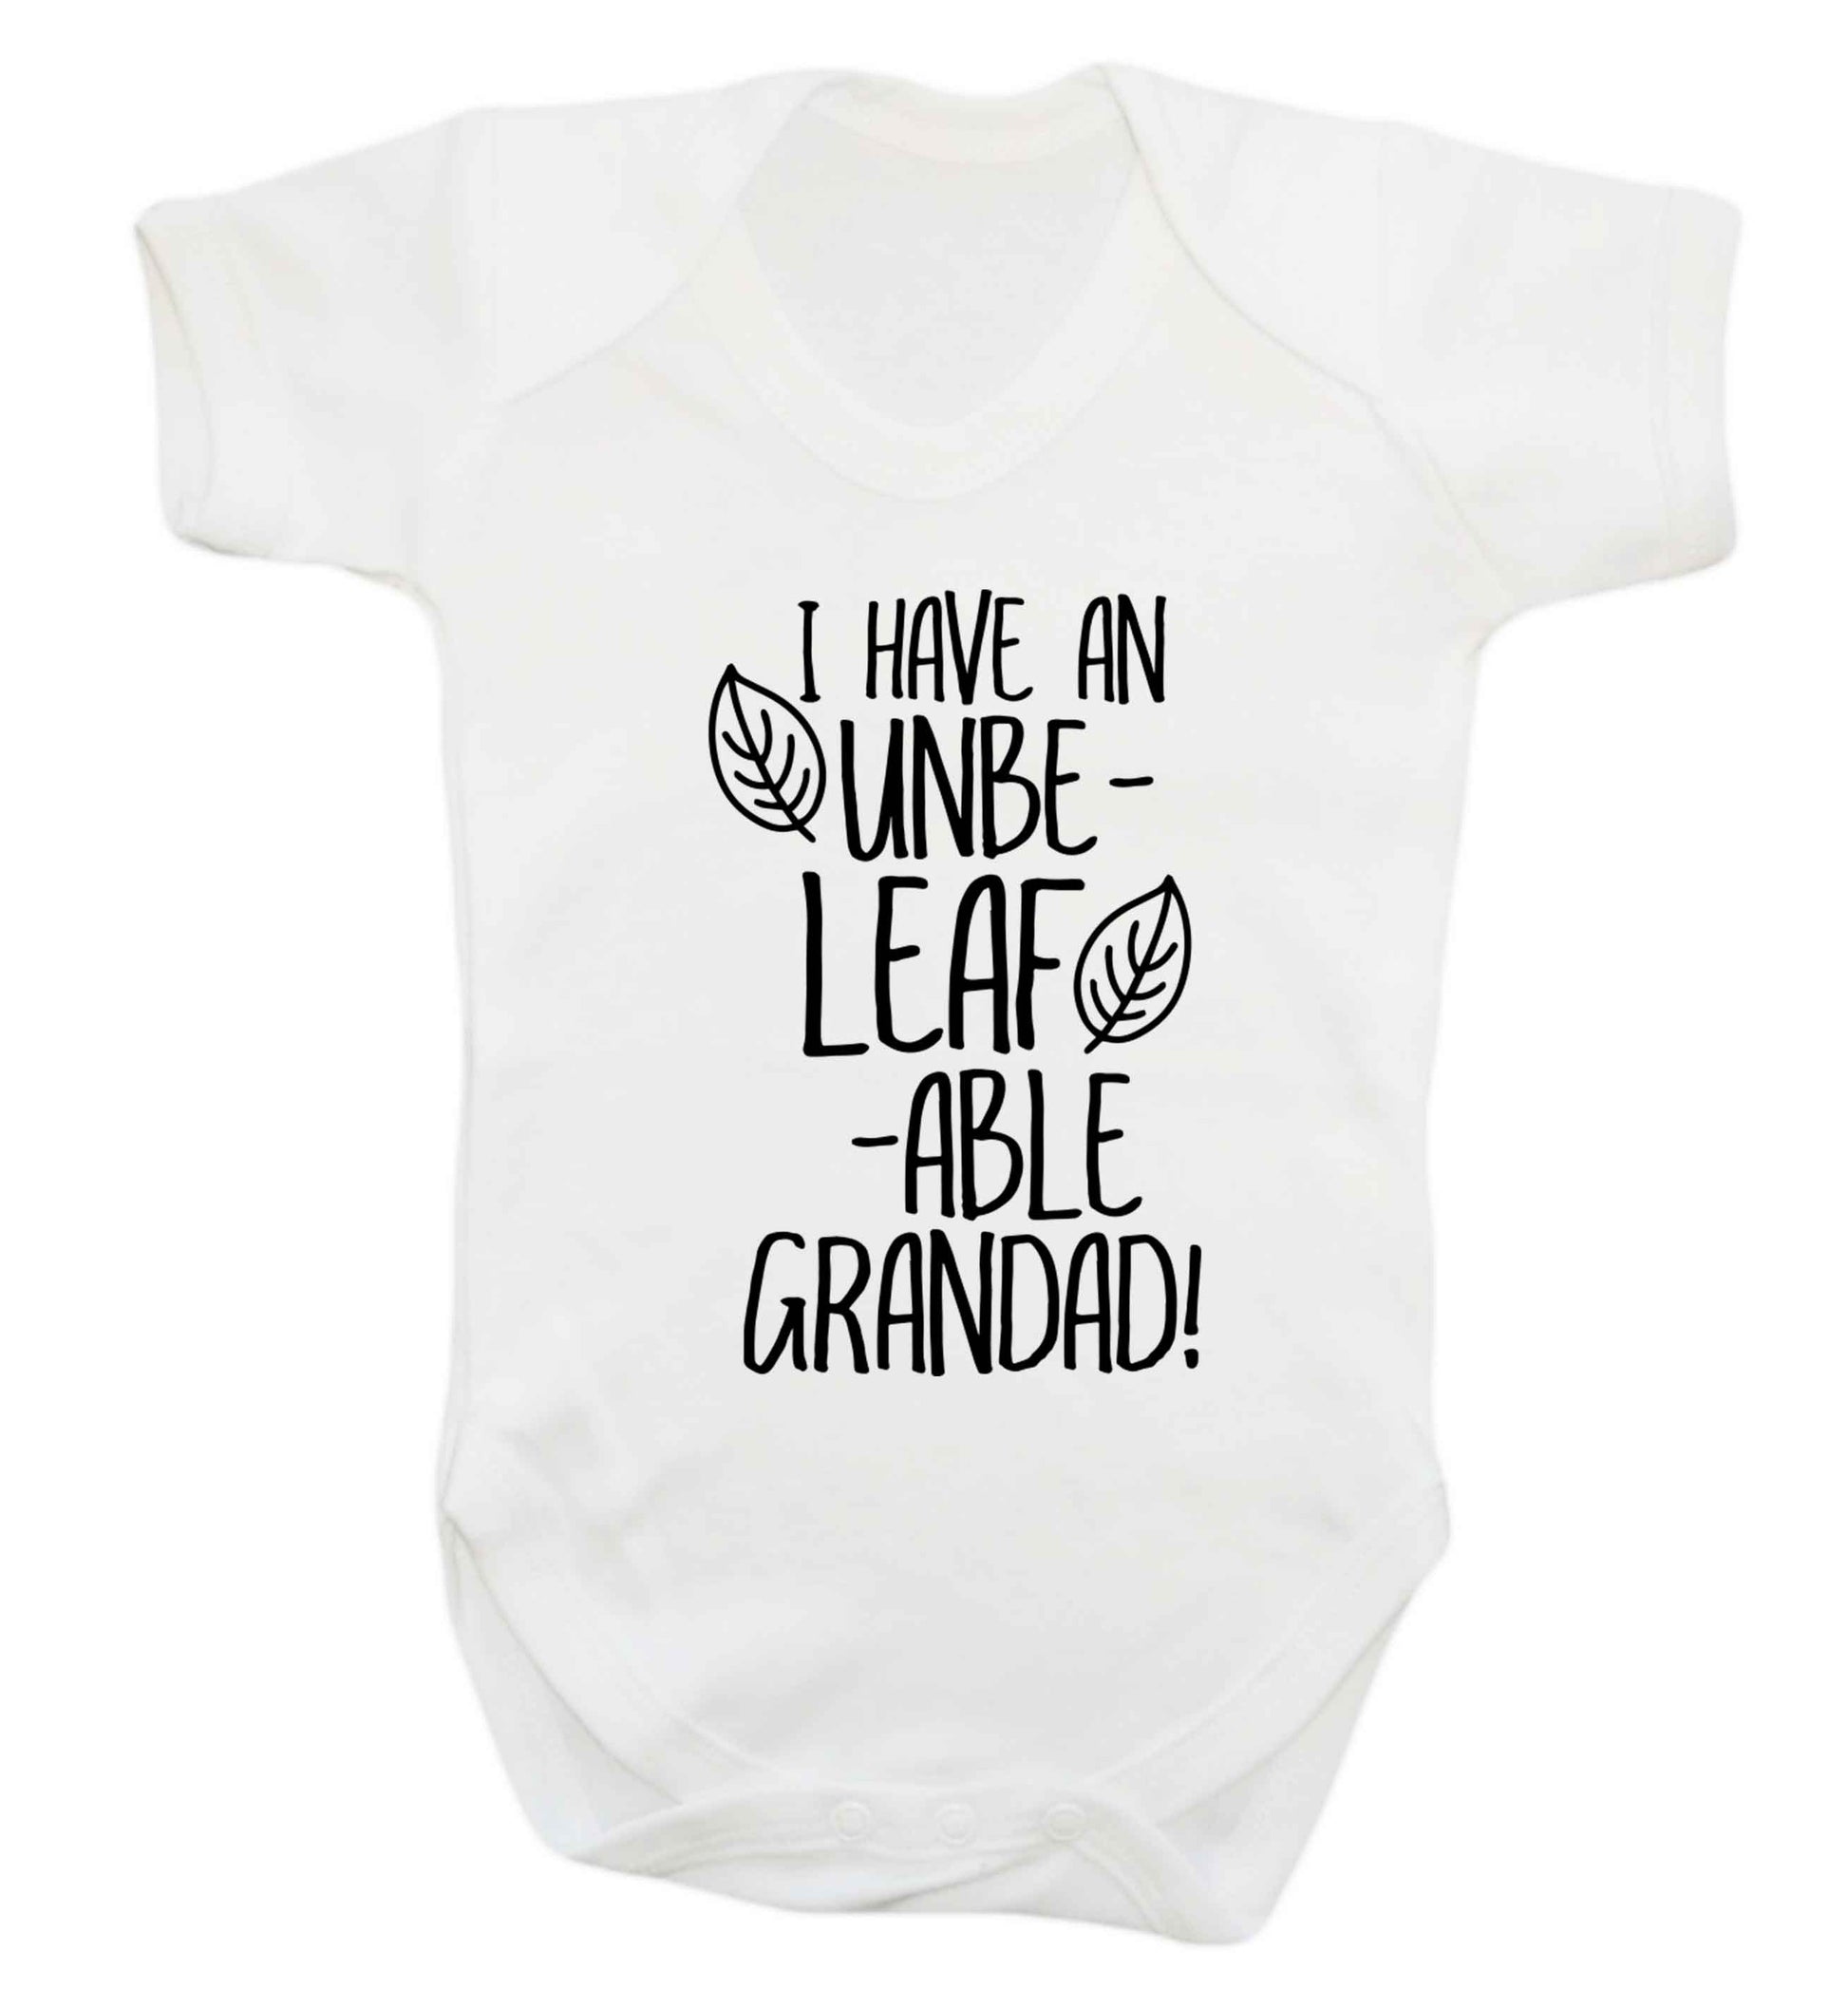 I have an unbe-leaf-able grandad Baby Vest white 18-24 months